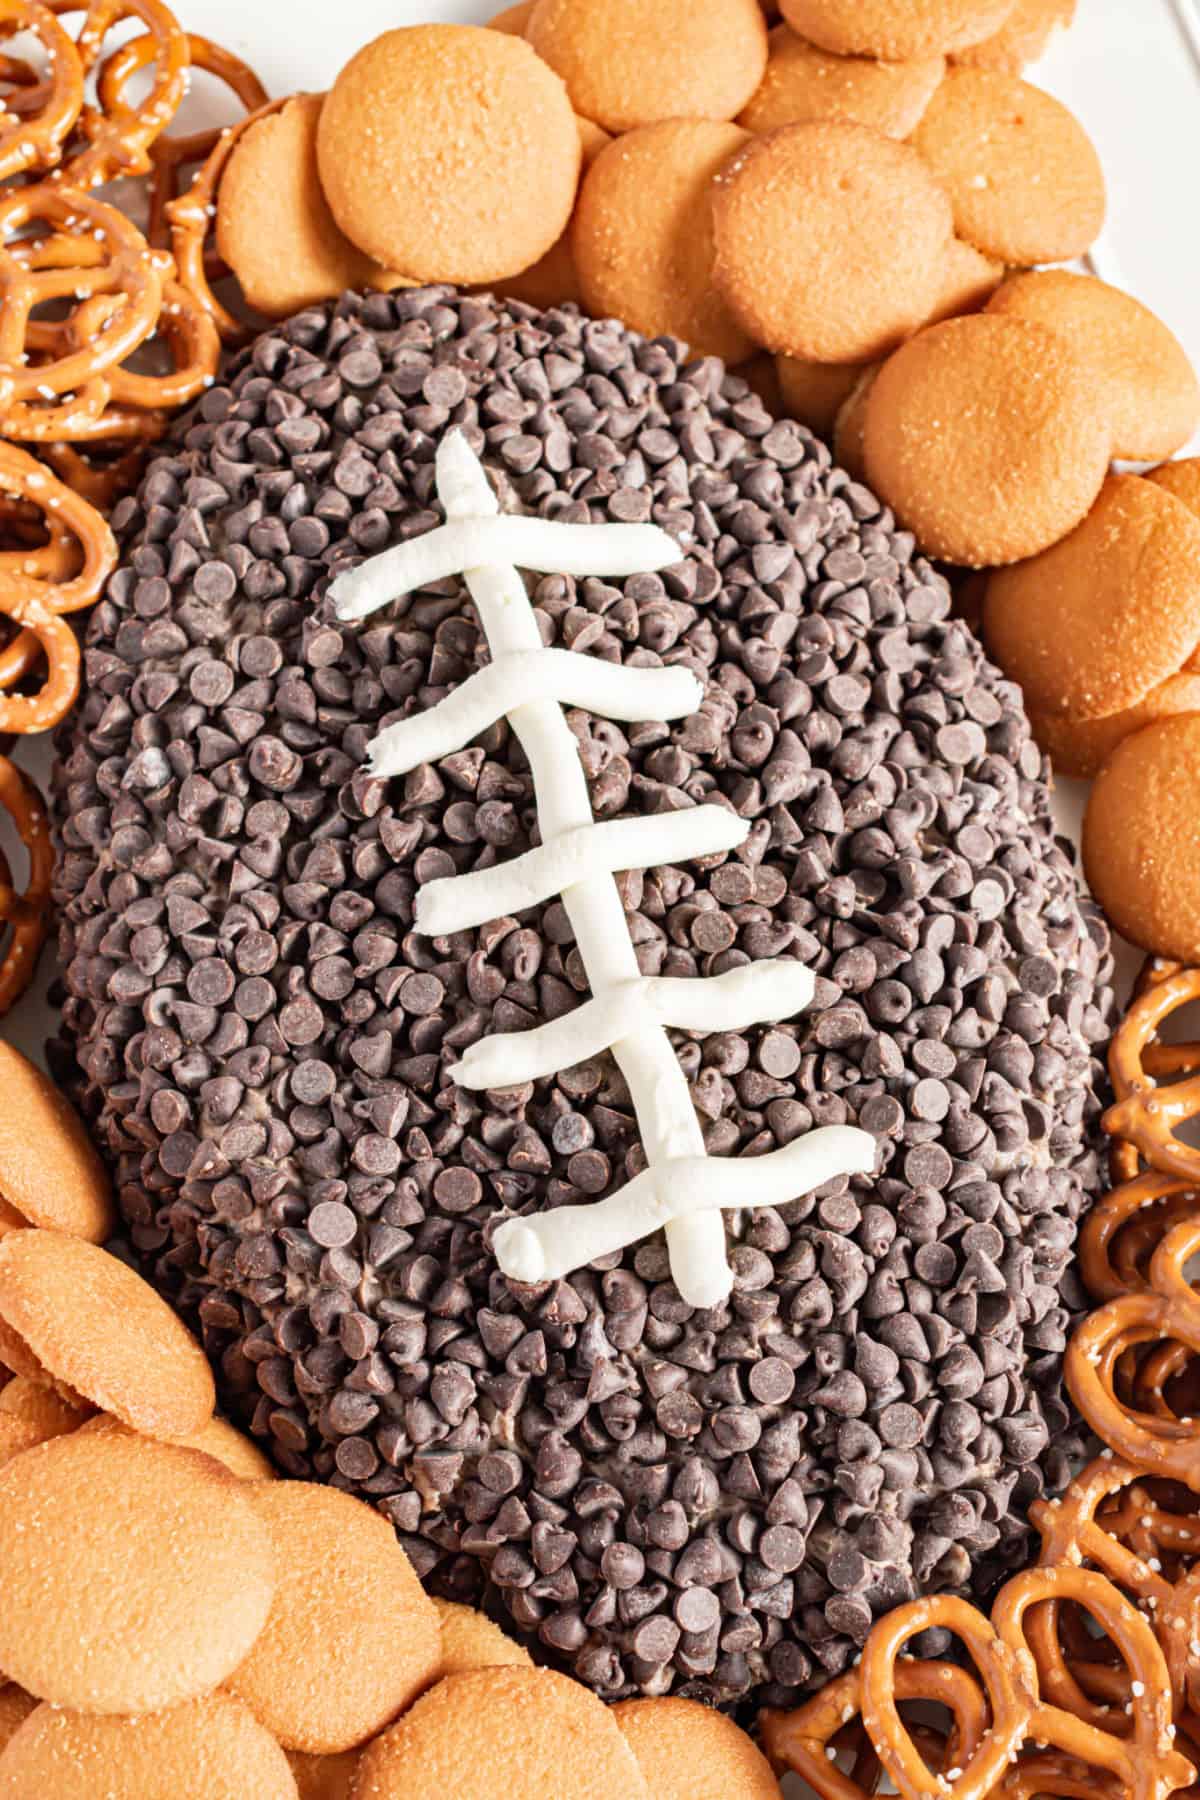 Football shaped oreo cheese ball with nilla wafers and pretzels.